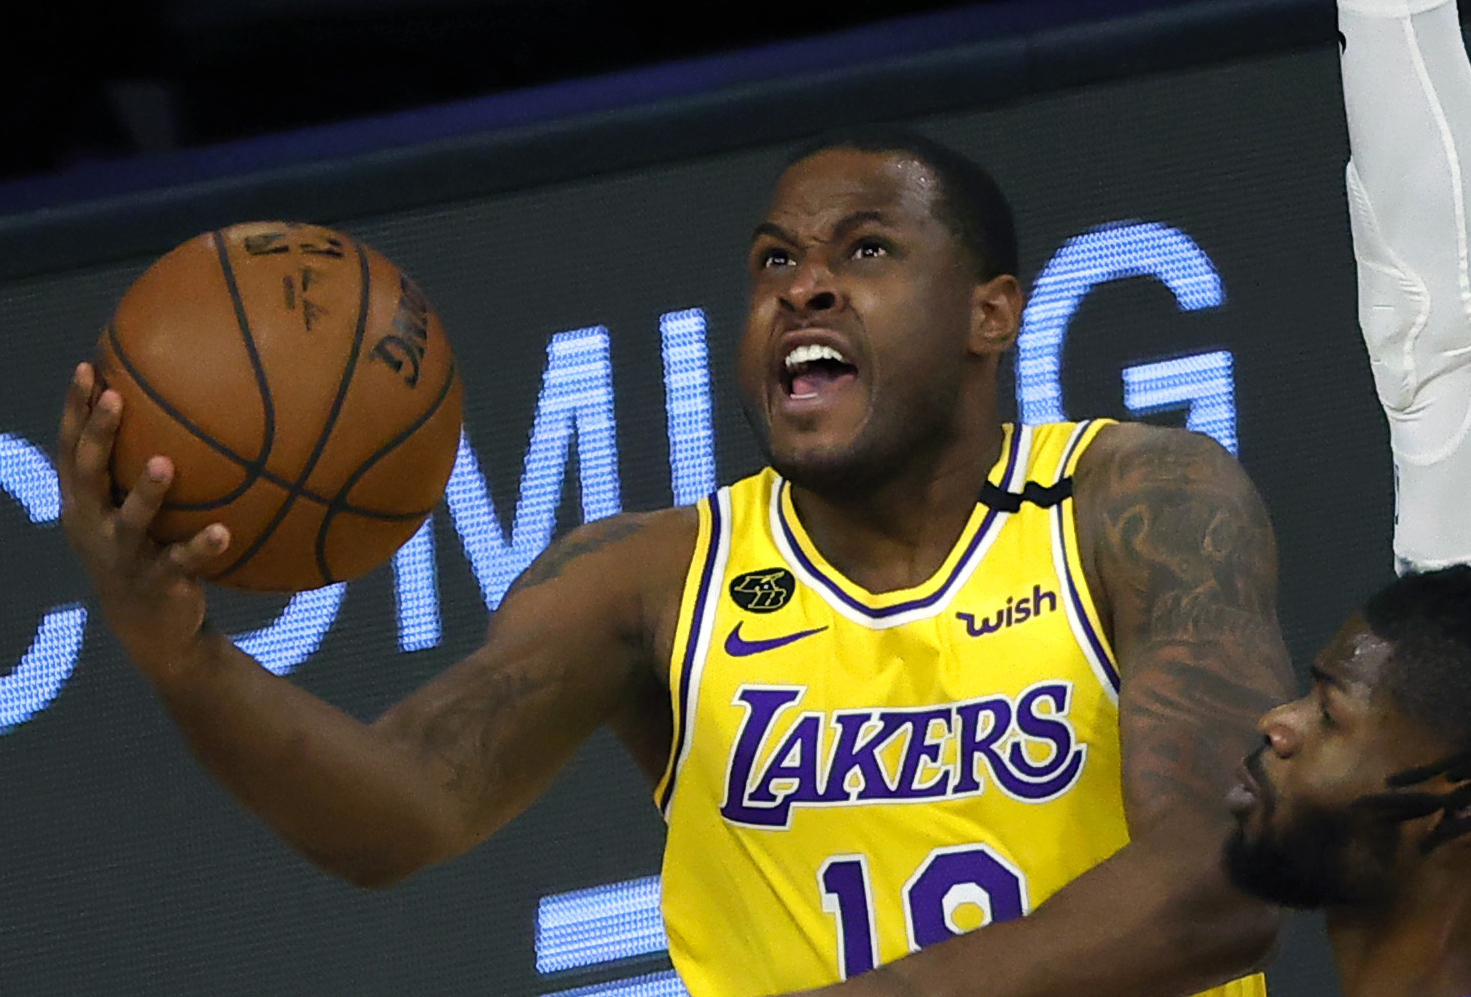 2012 No. 4 pick Dion Waiters attempting NBA comeback after 3 seasons away  from league